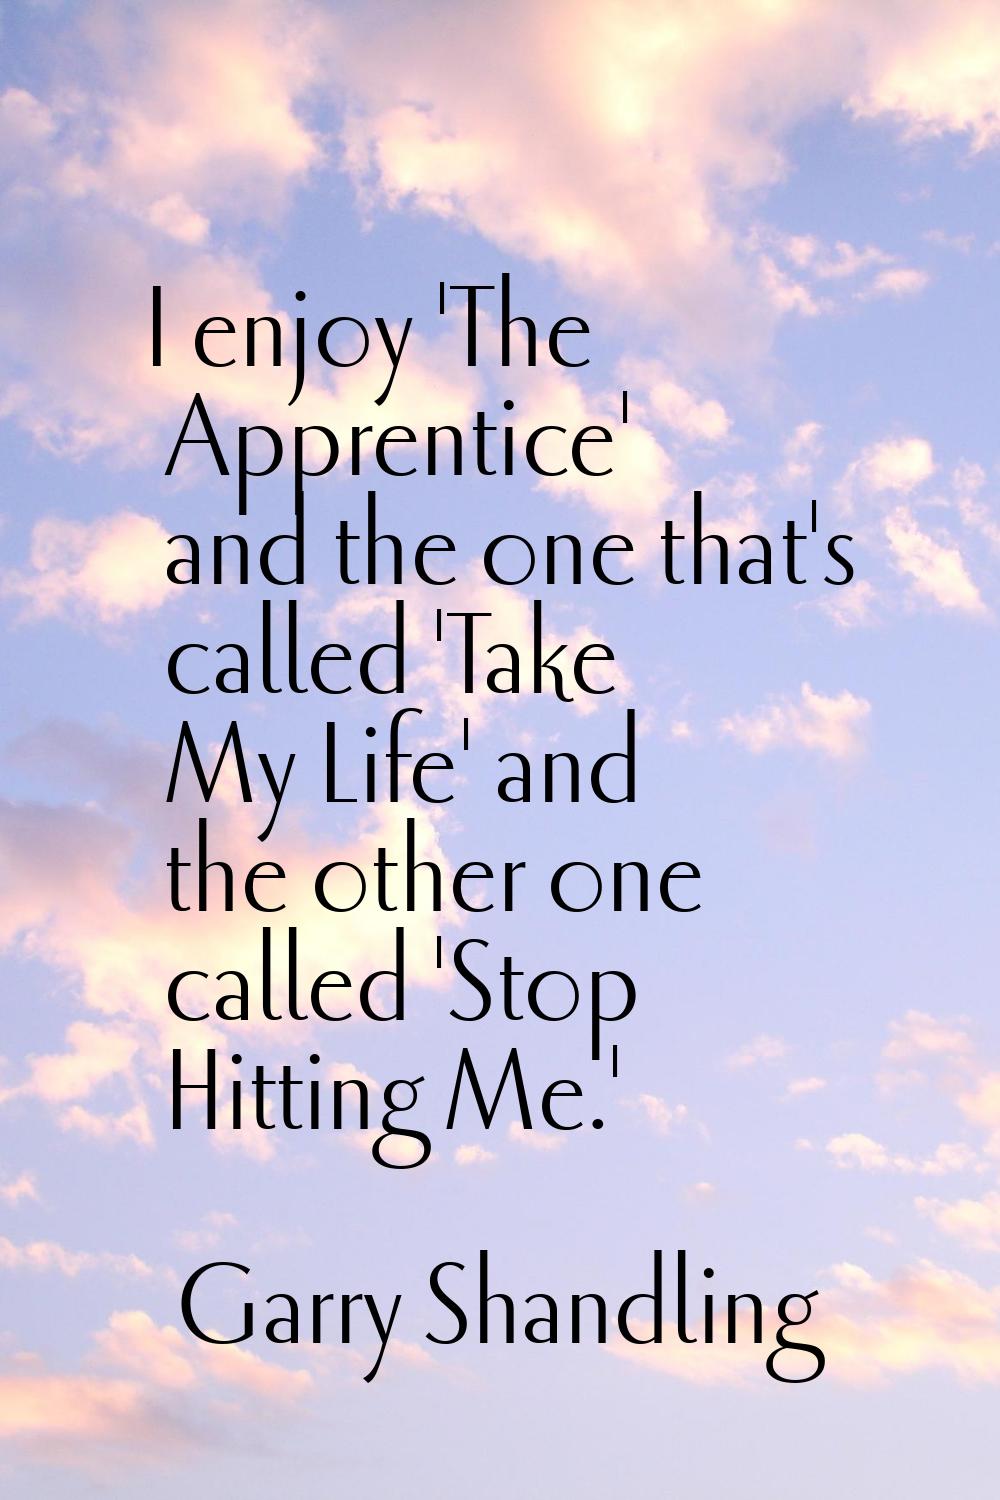 I enjoy 'The Apprentice' and the one that's called 'Take My Life' and the other one called 'Stop Hi